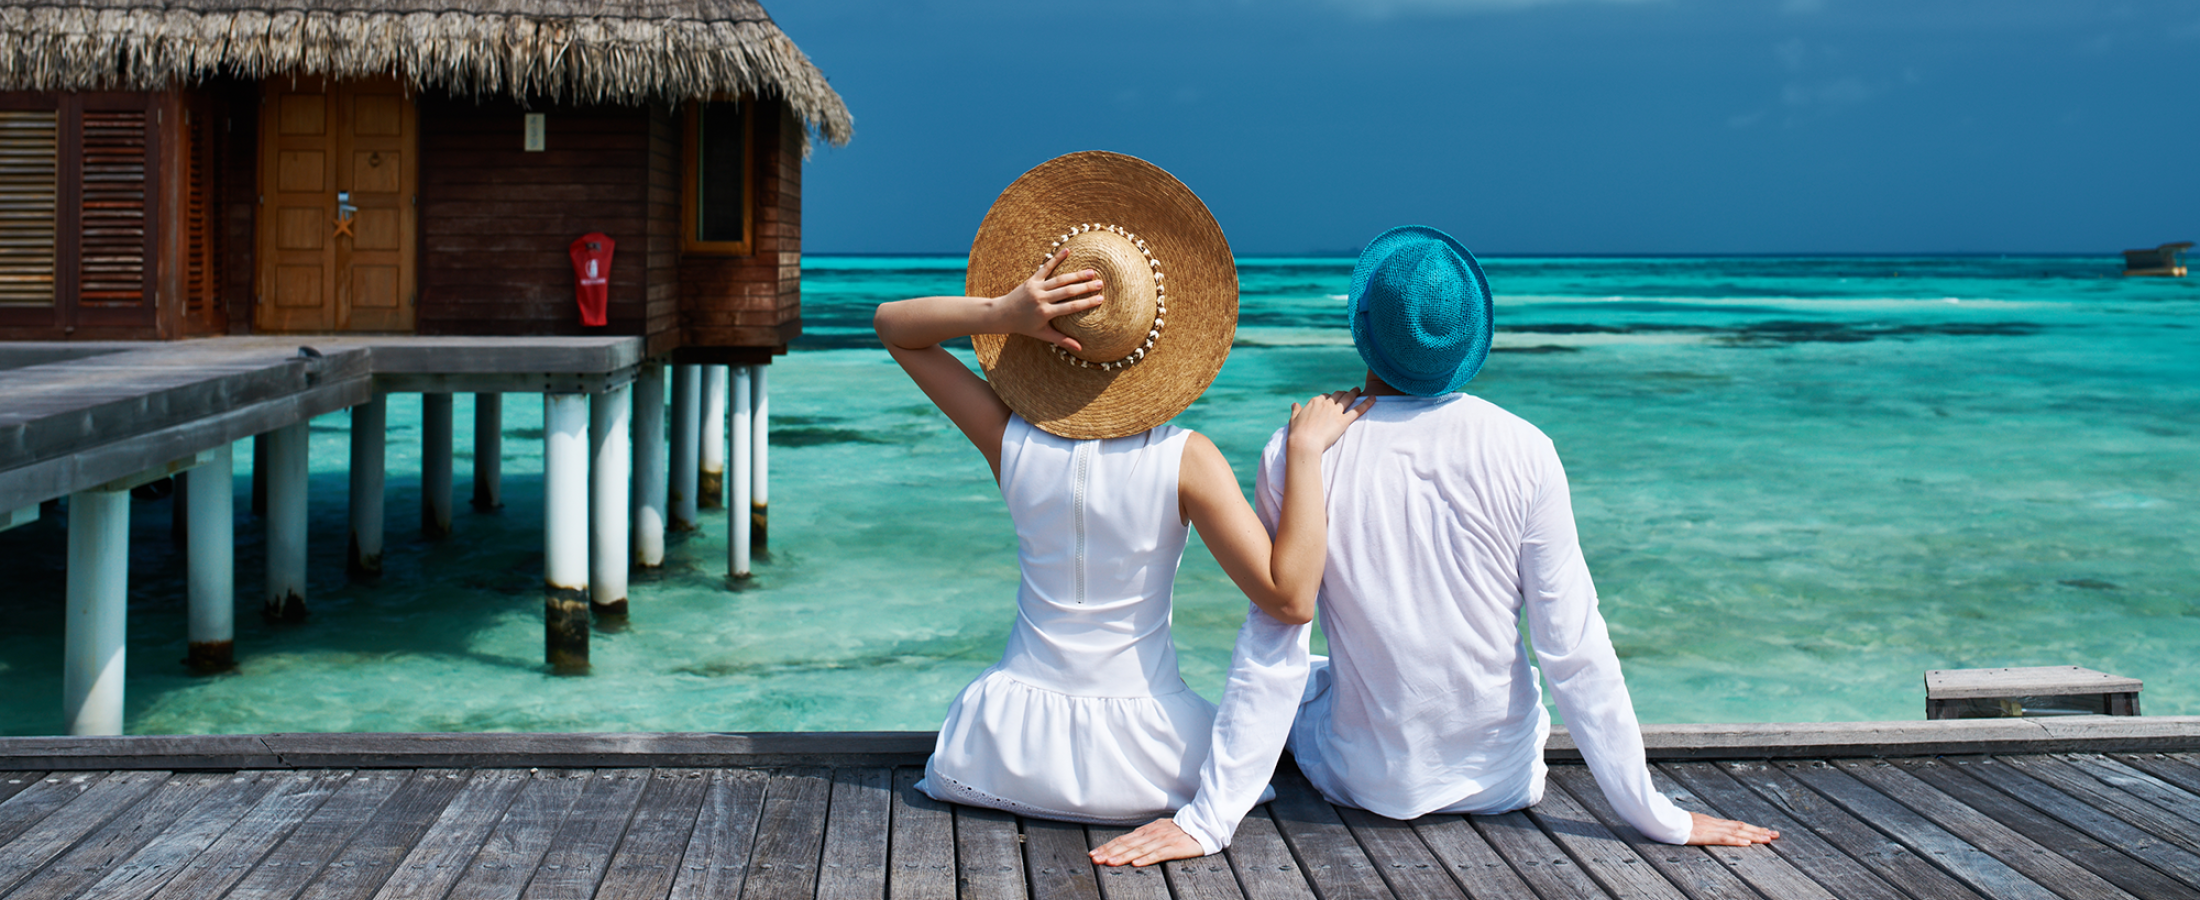 Planning your honeymoon on a budget